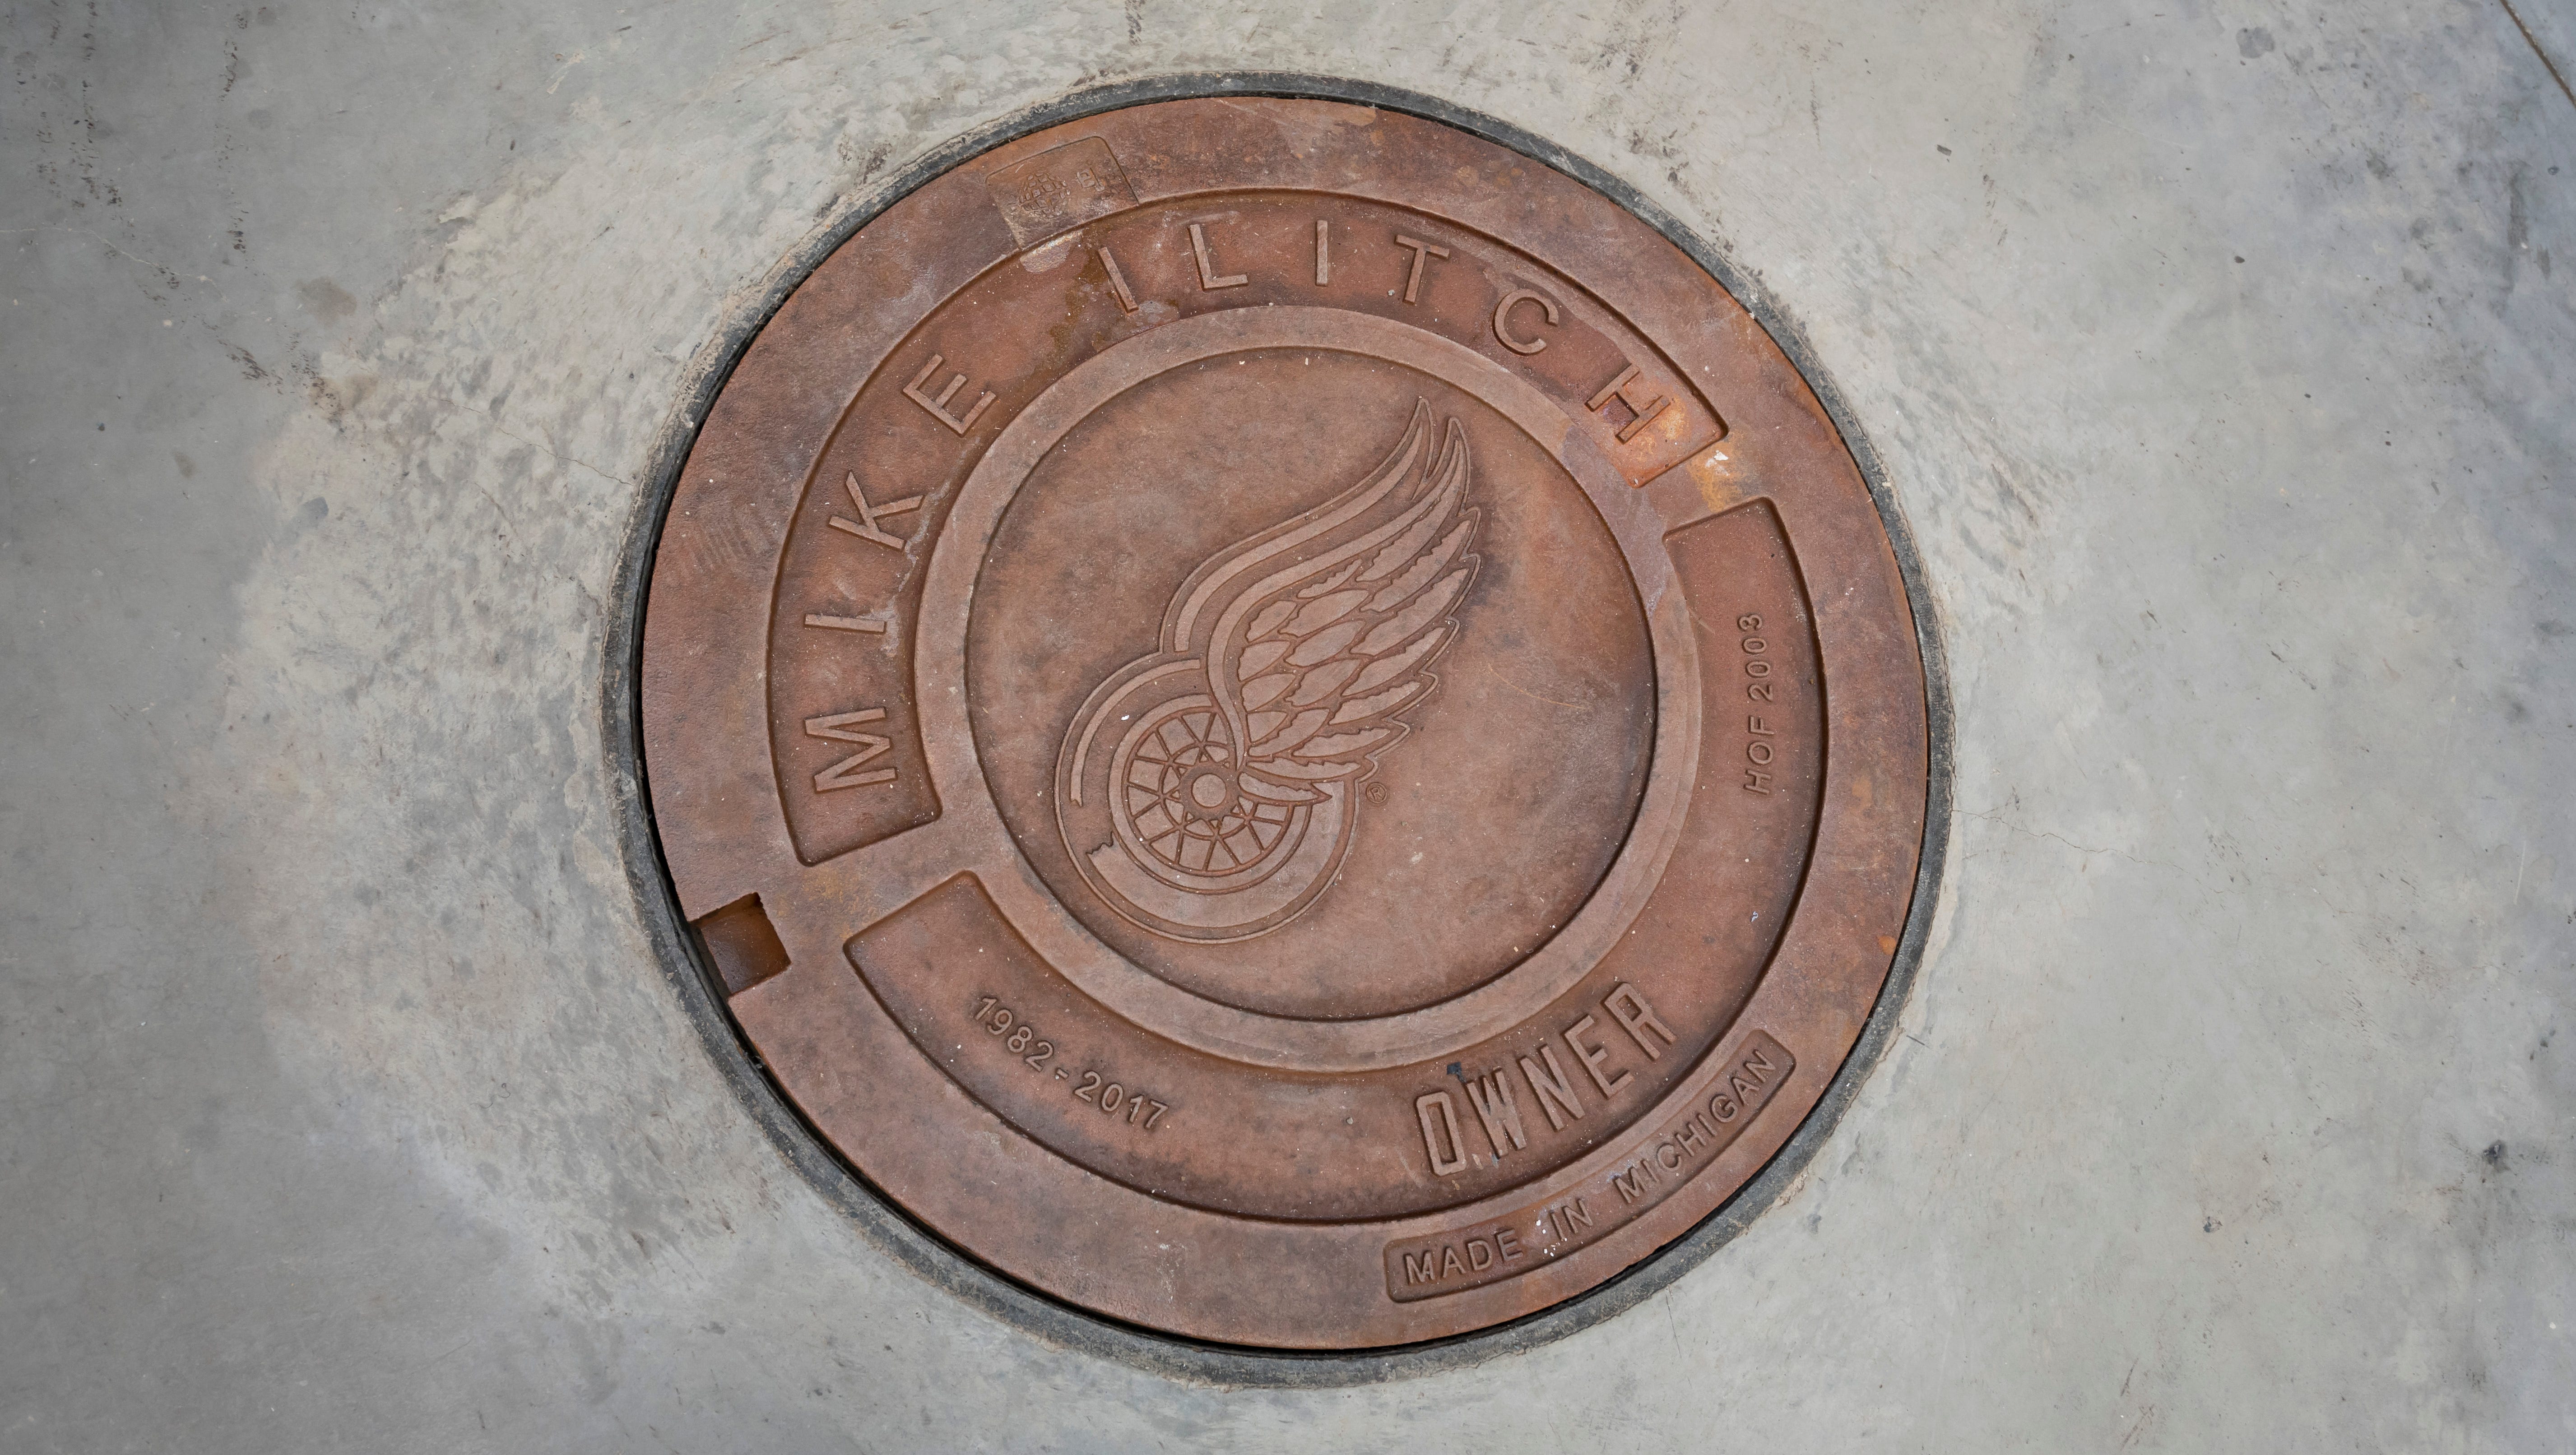 Manhole covers dedicated to Detroit greats, including the late owner of the Detroit Red Wings and Detroit Tigers, Mike Ilitch, line the floor of the concourse level.